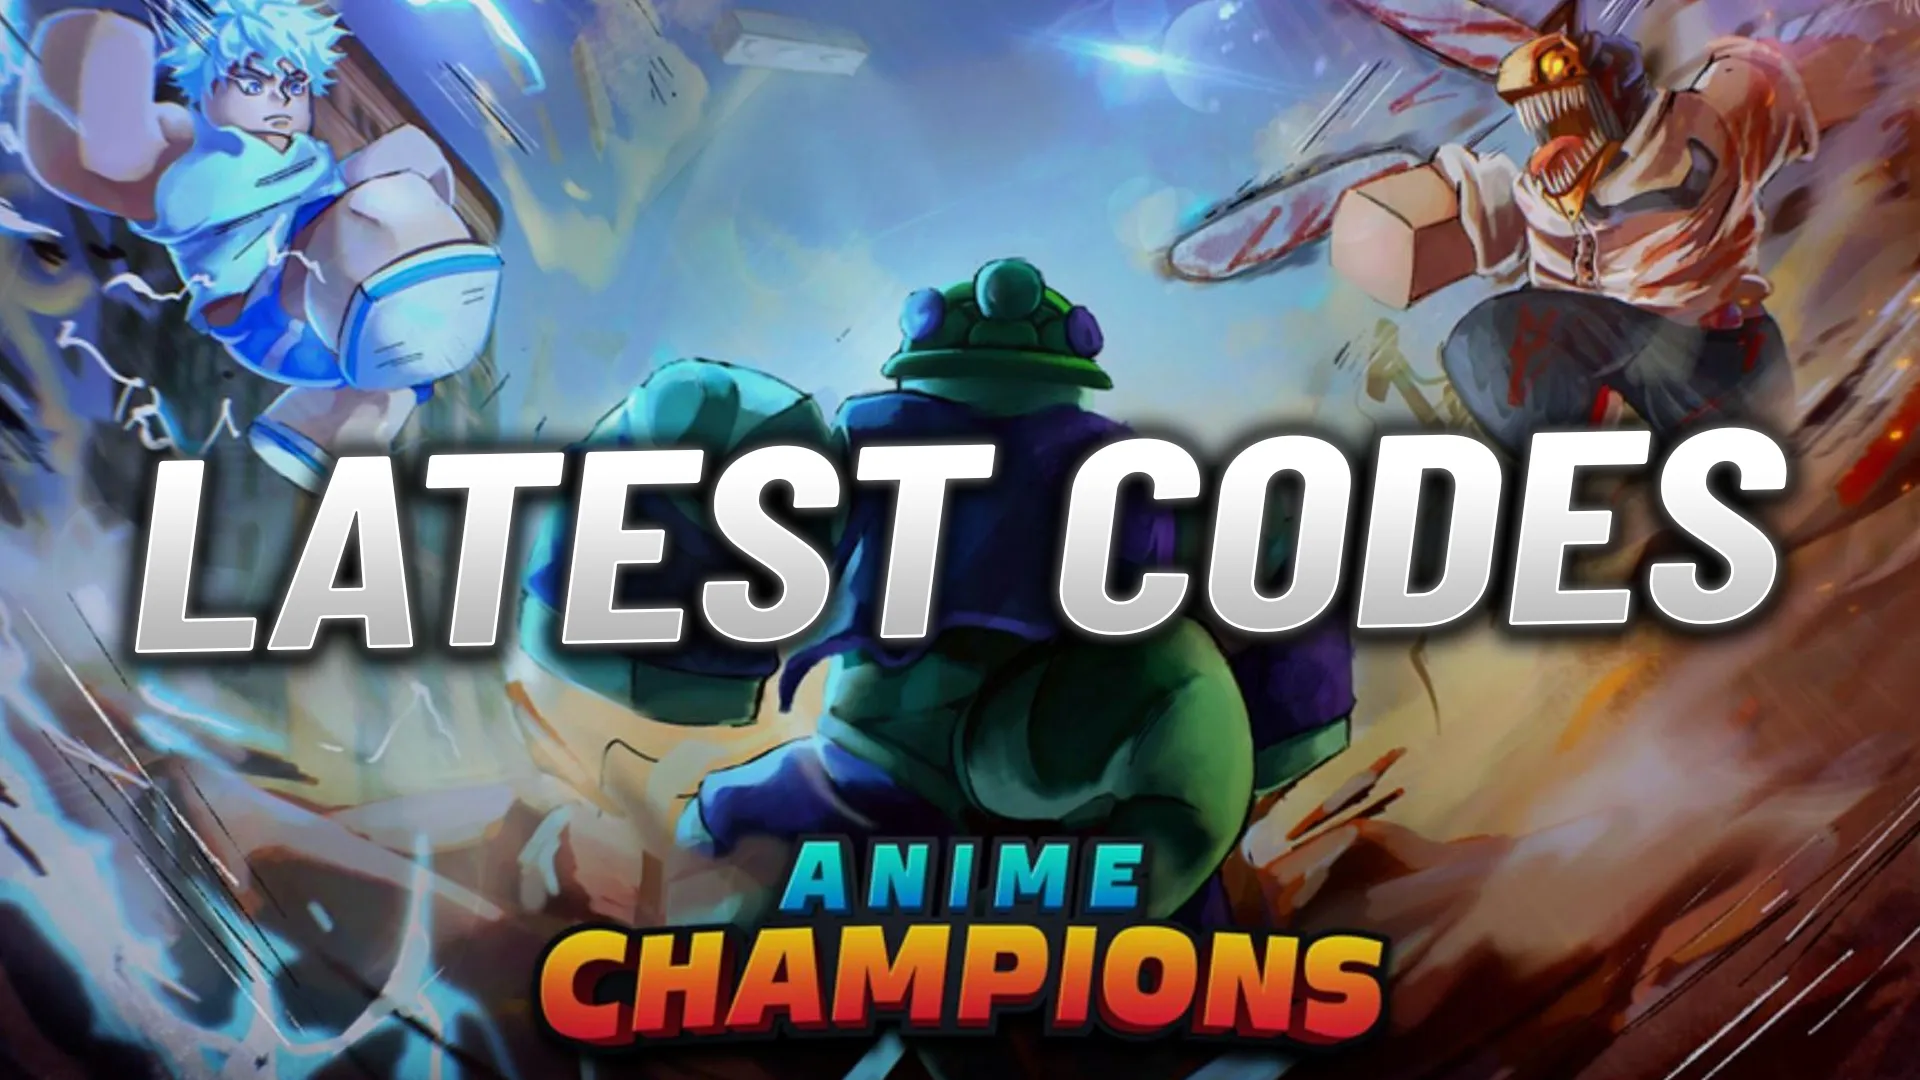 Anime Battle Simulator codes for free items and summons